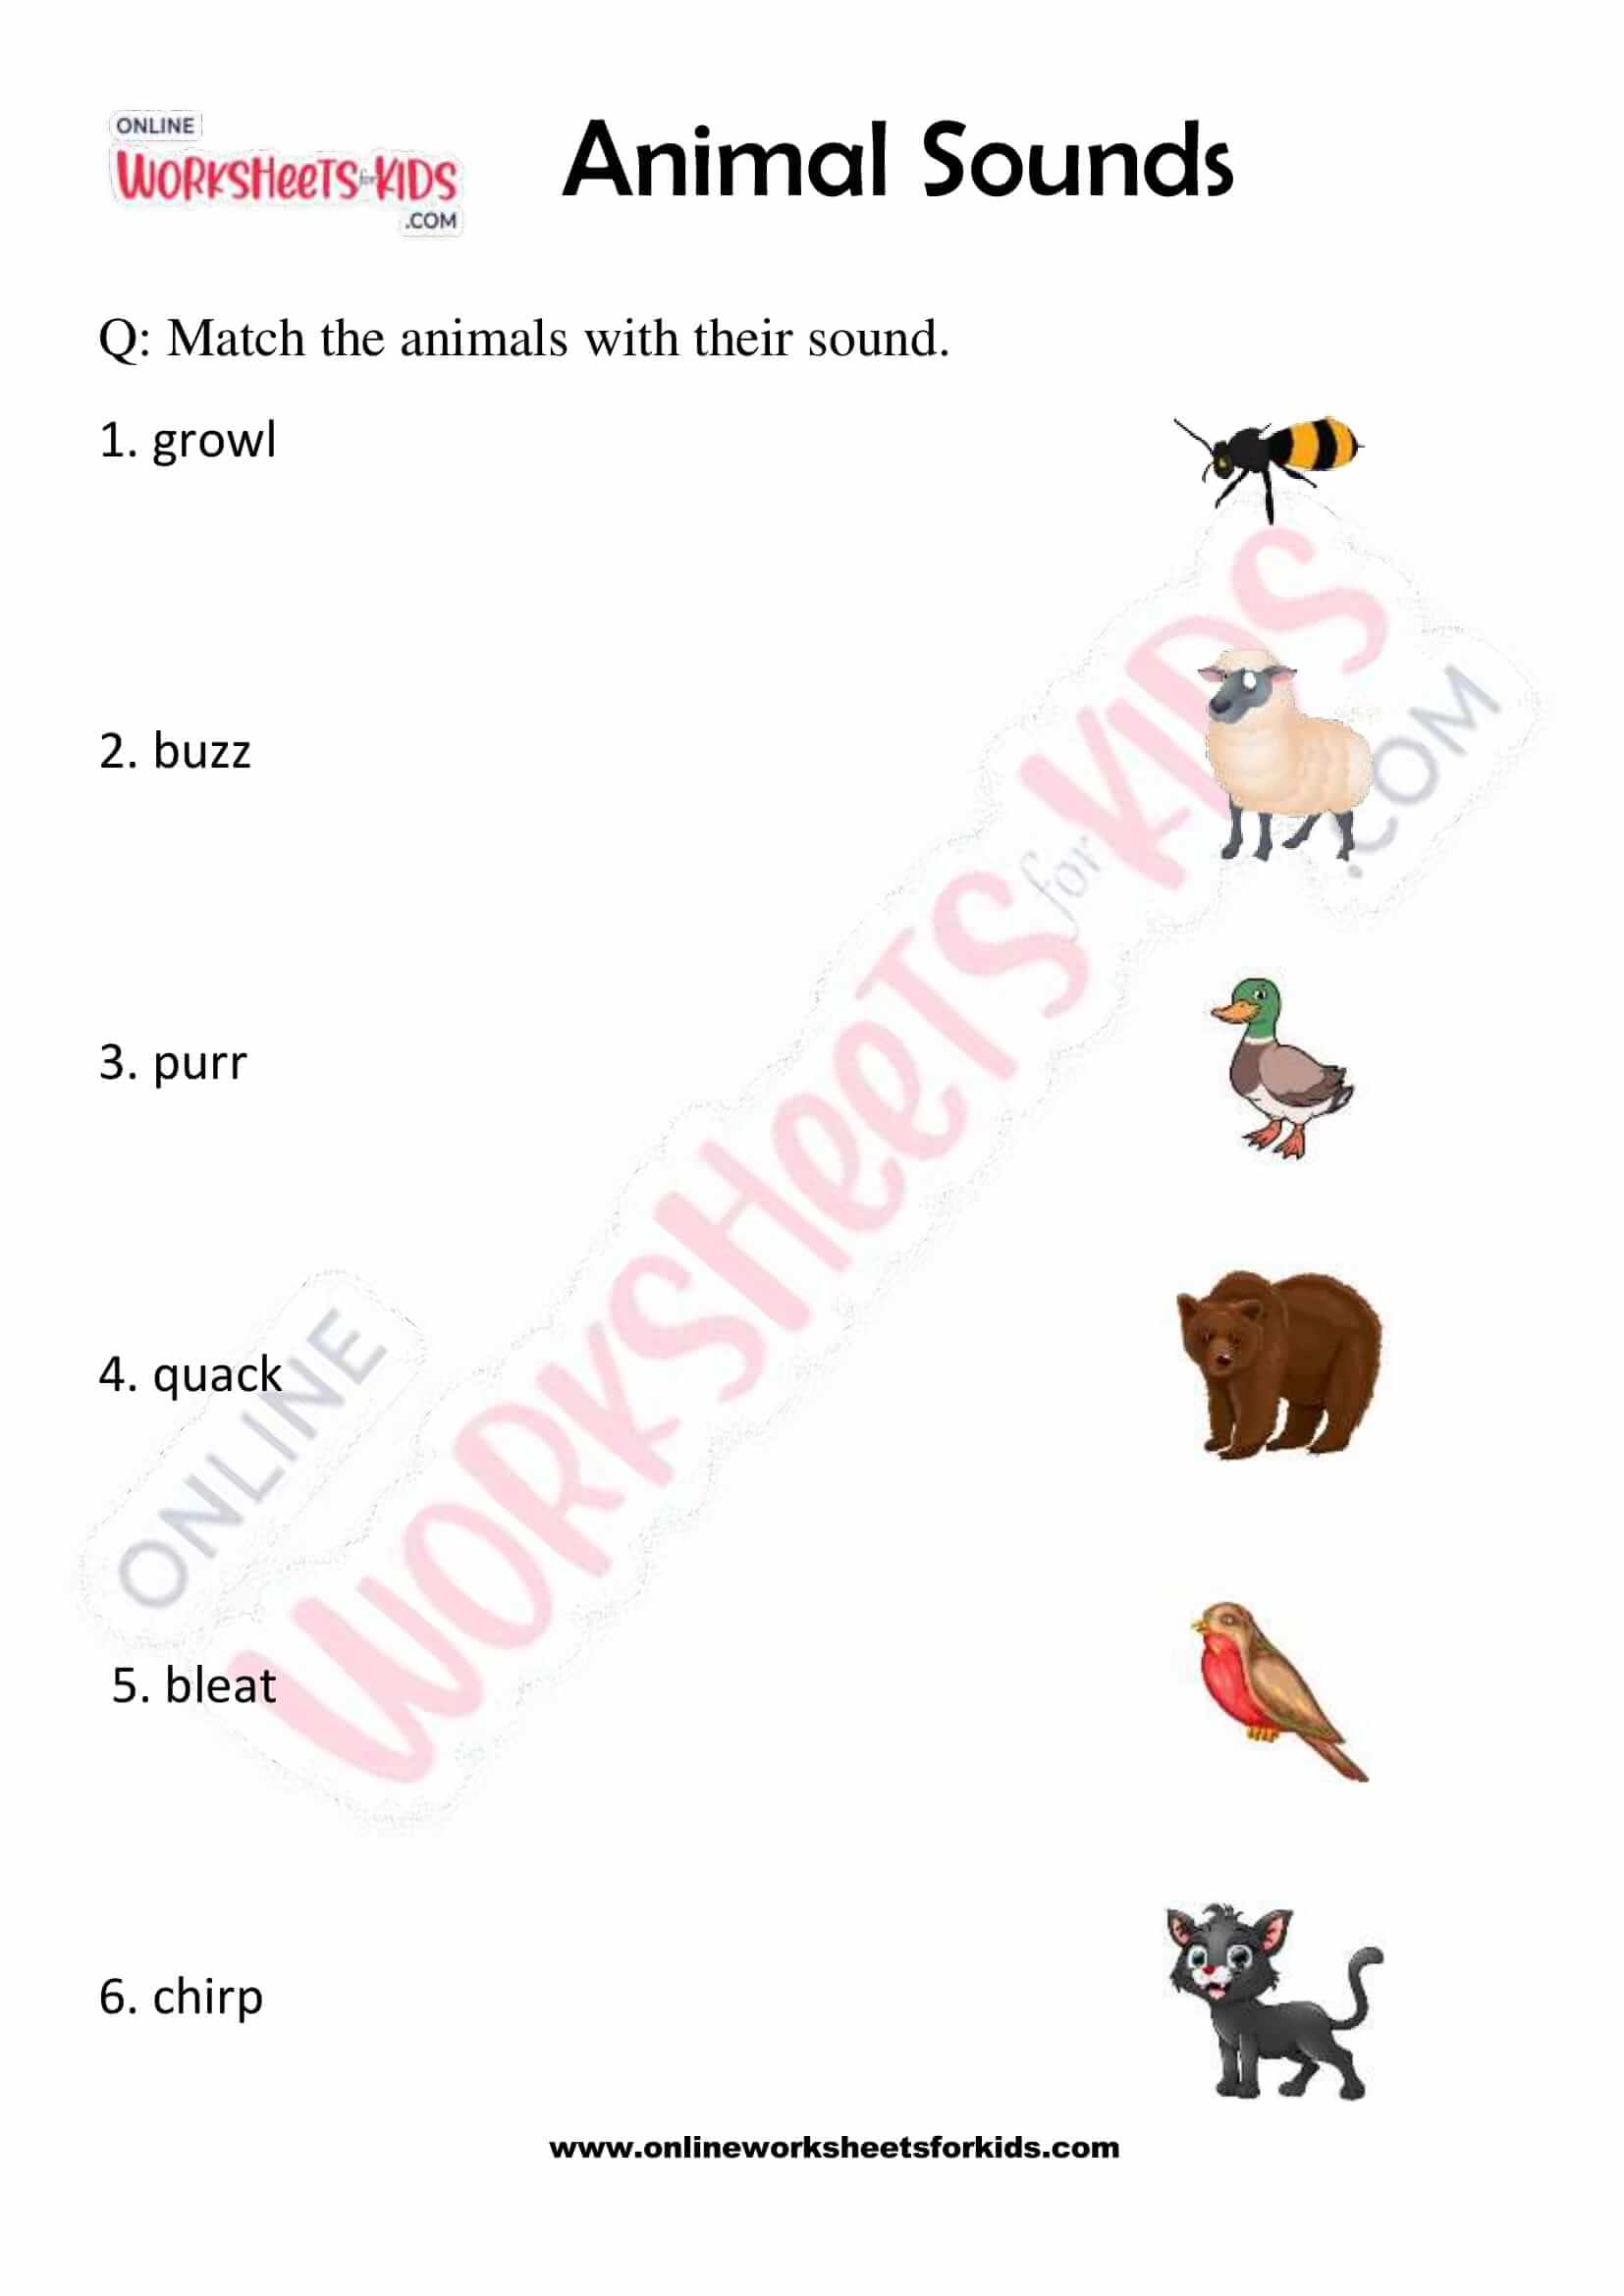 Animals and Their Sounds Worksheet for Grade 1